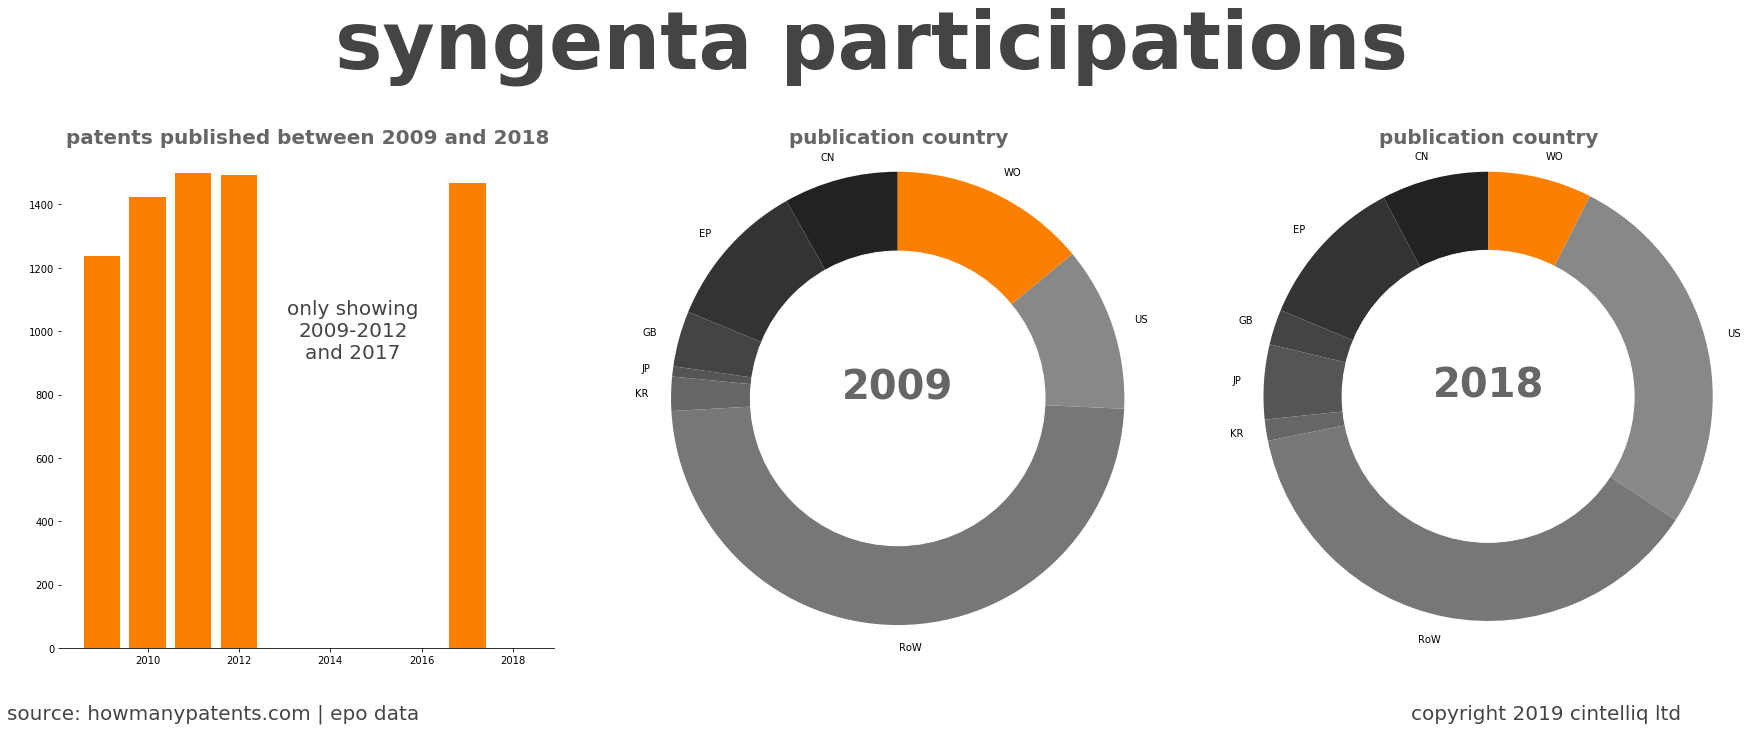 summary of patents for Syngenta Participations